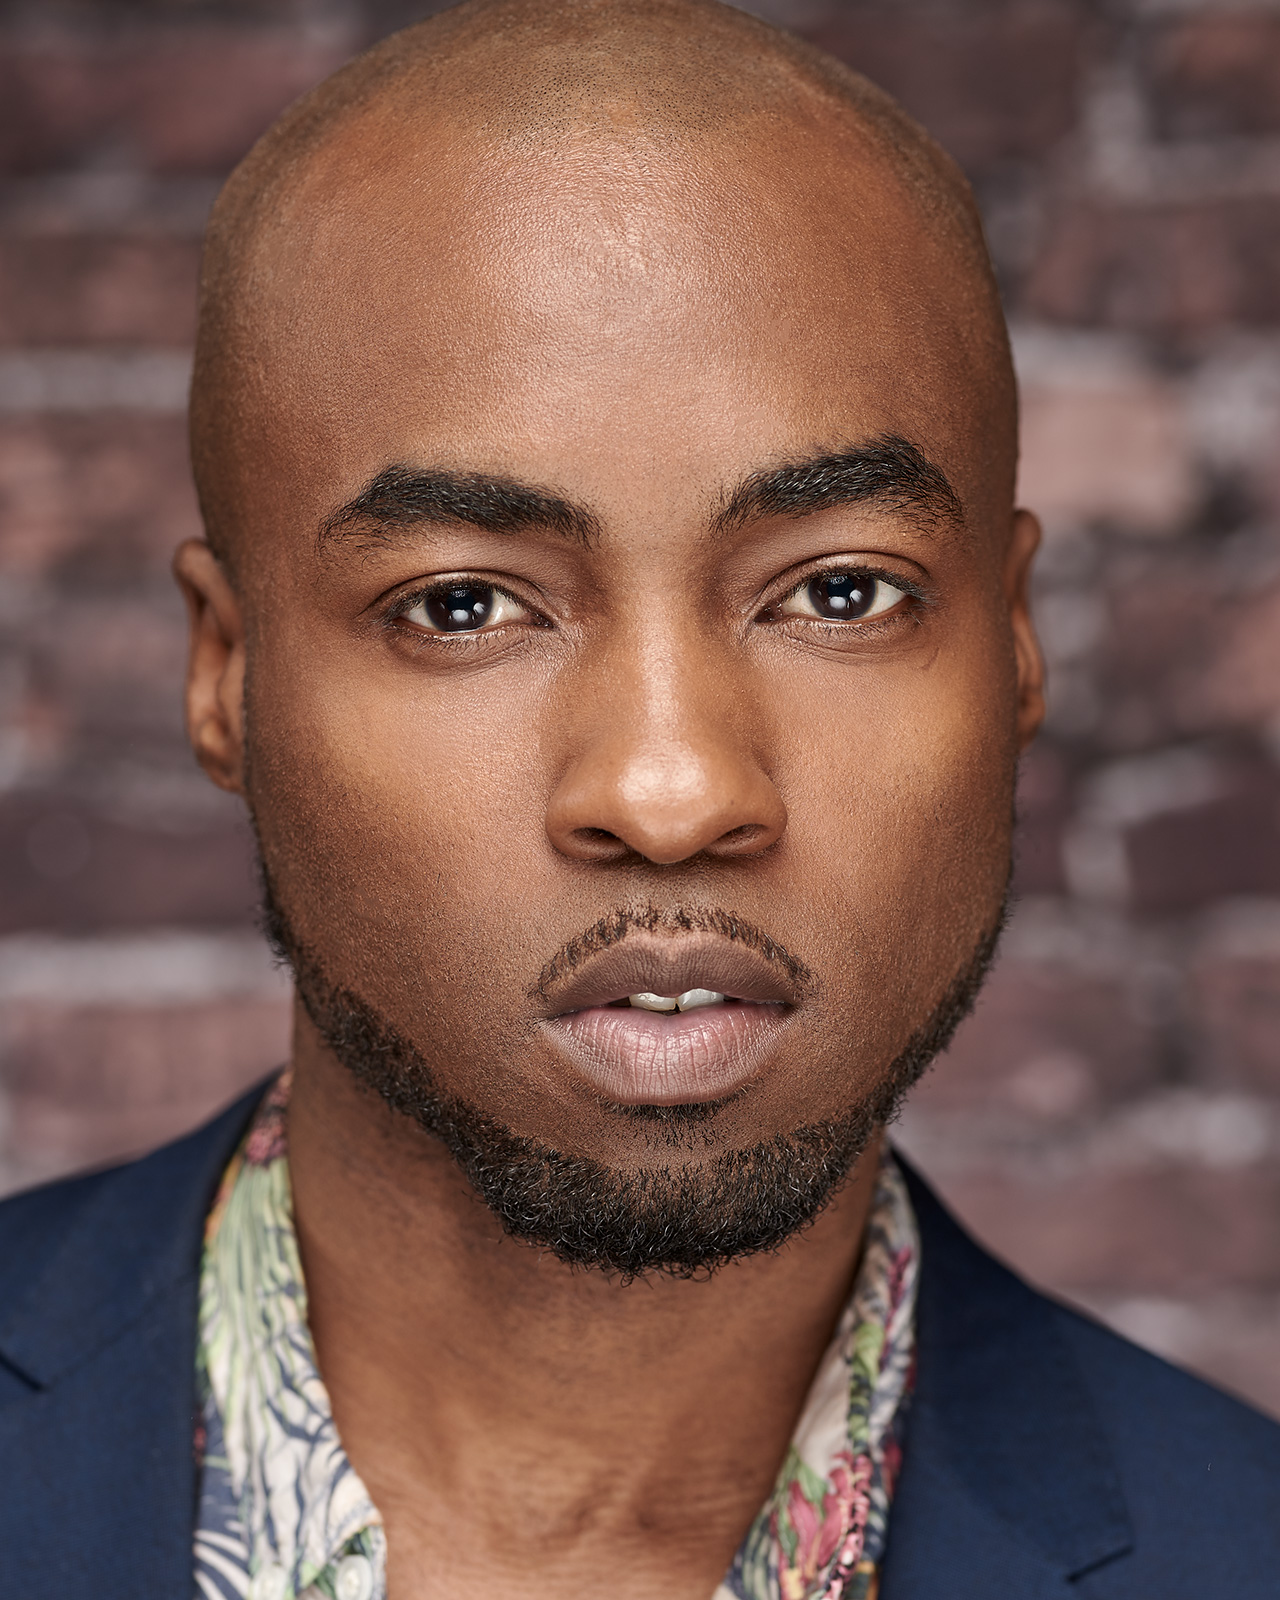 A male model headshot against a brick background made in Los Angeles